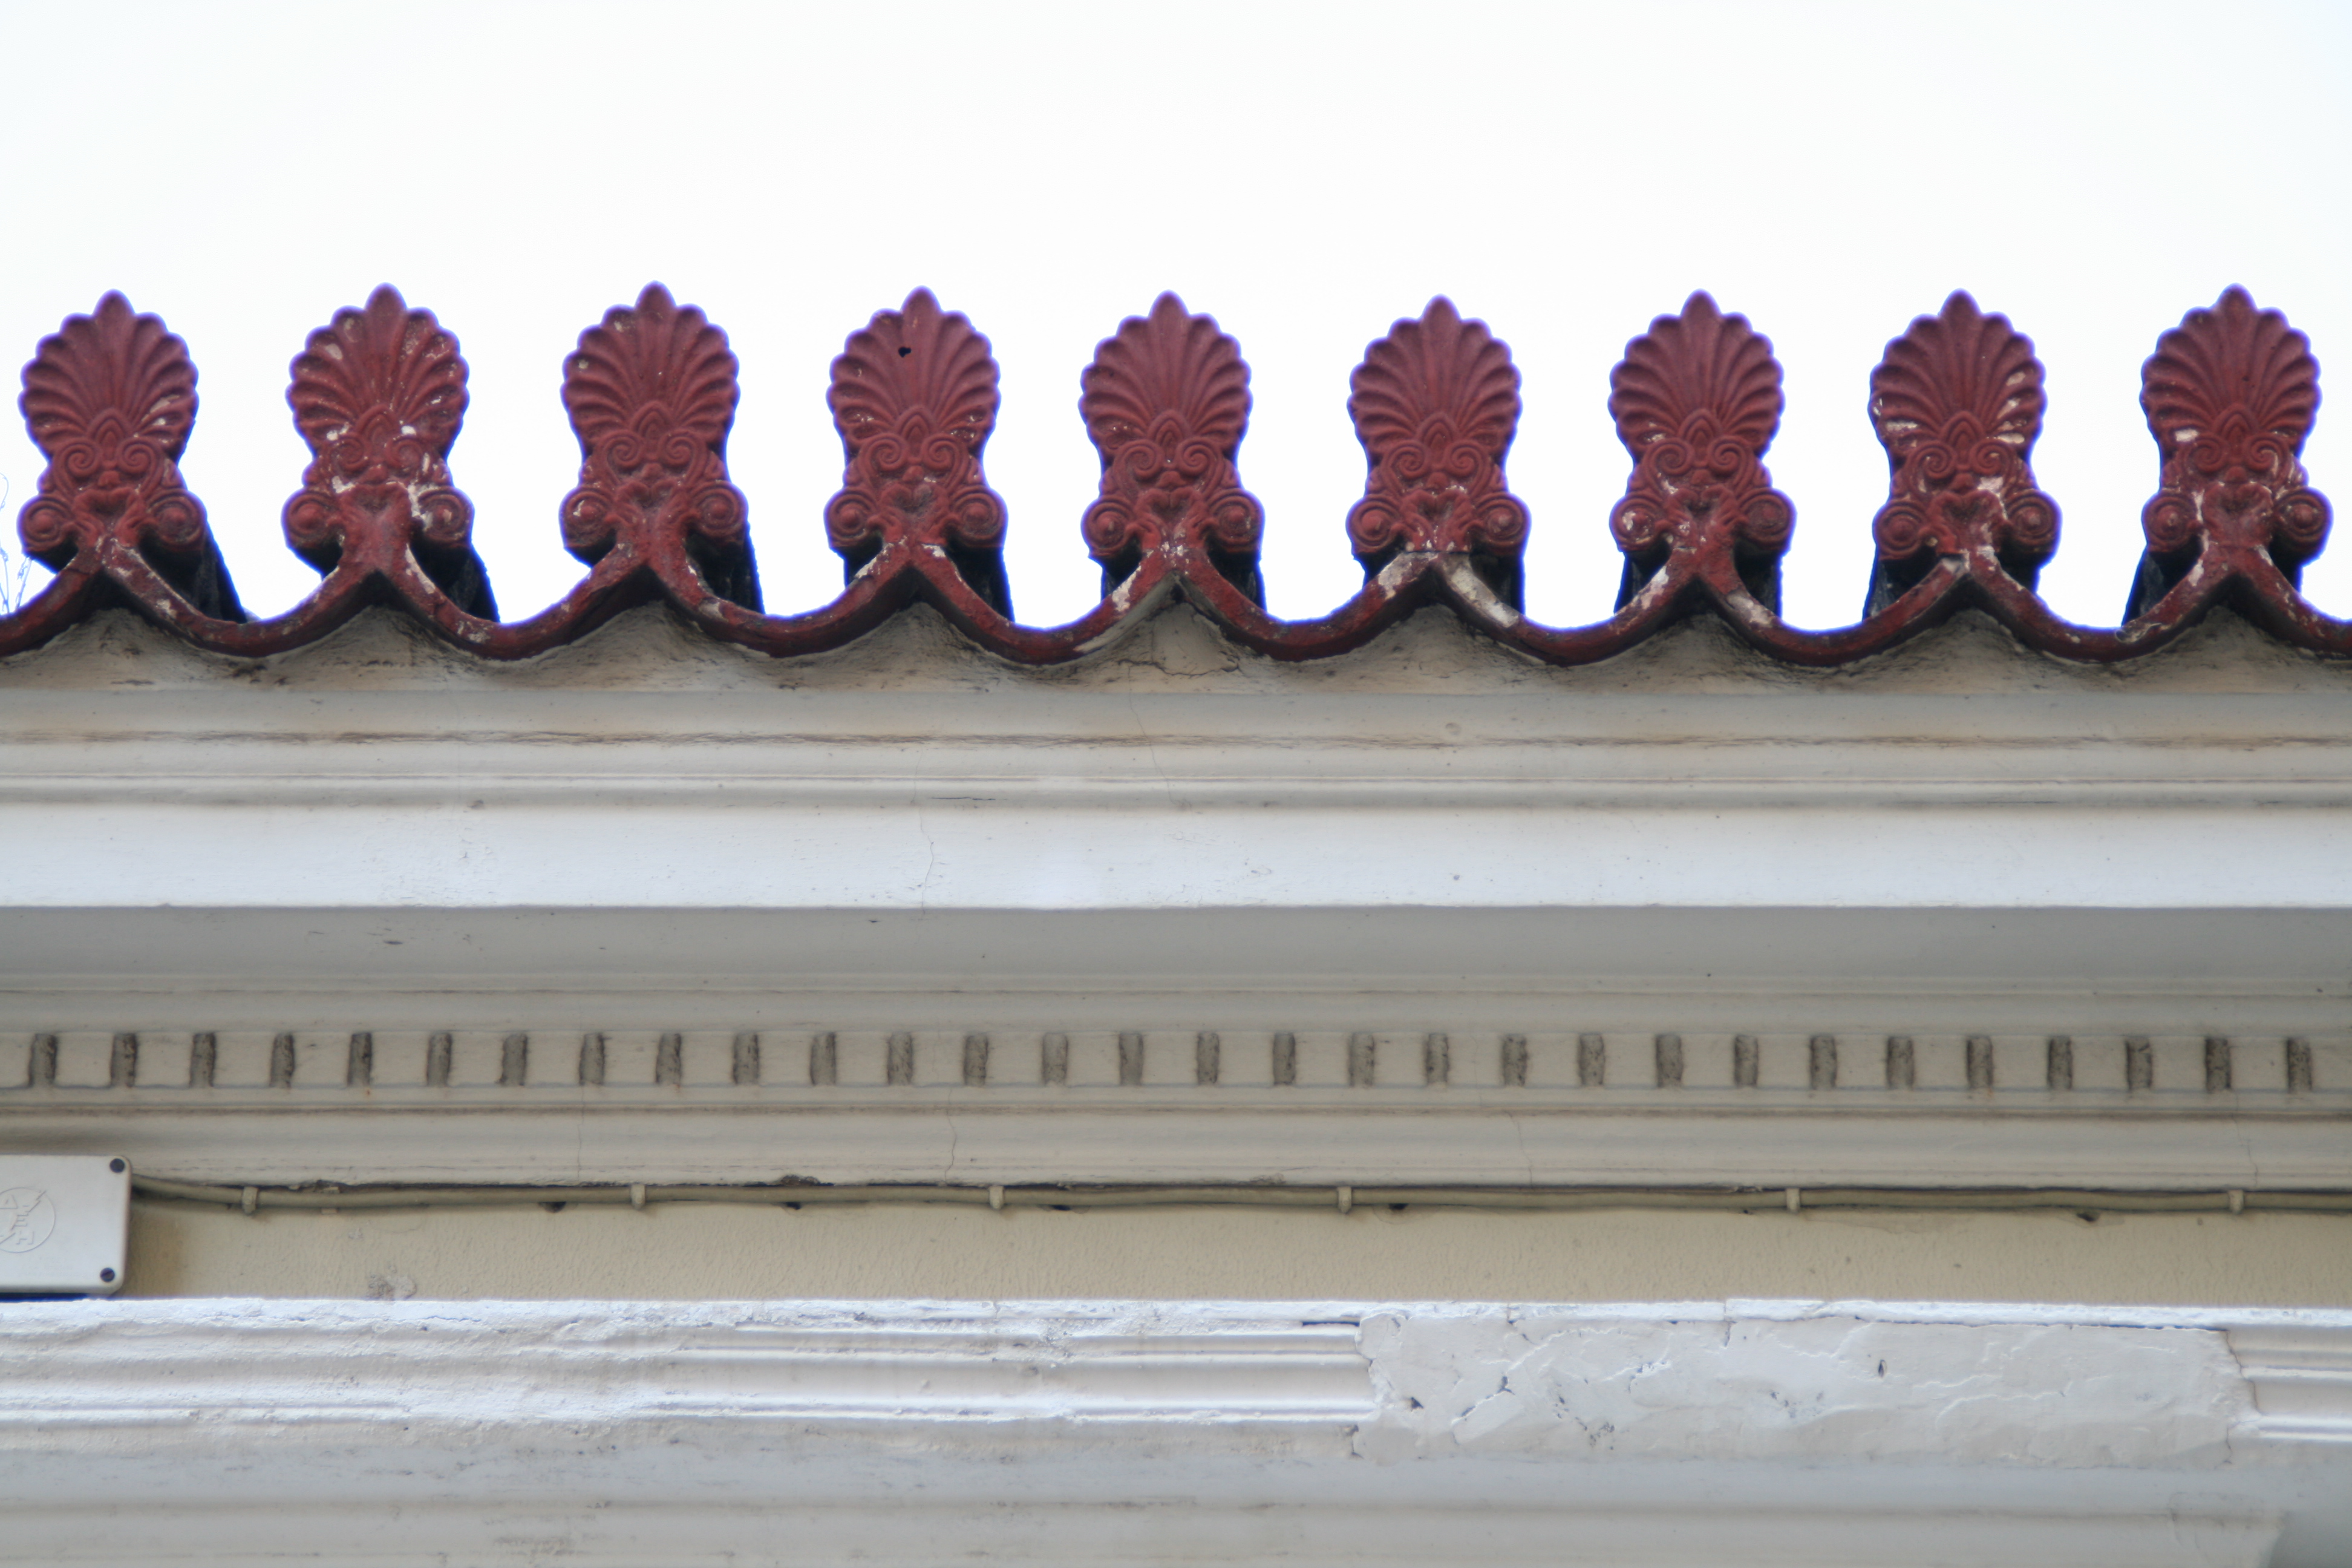 Detail of roof